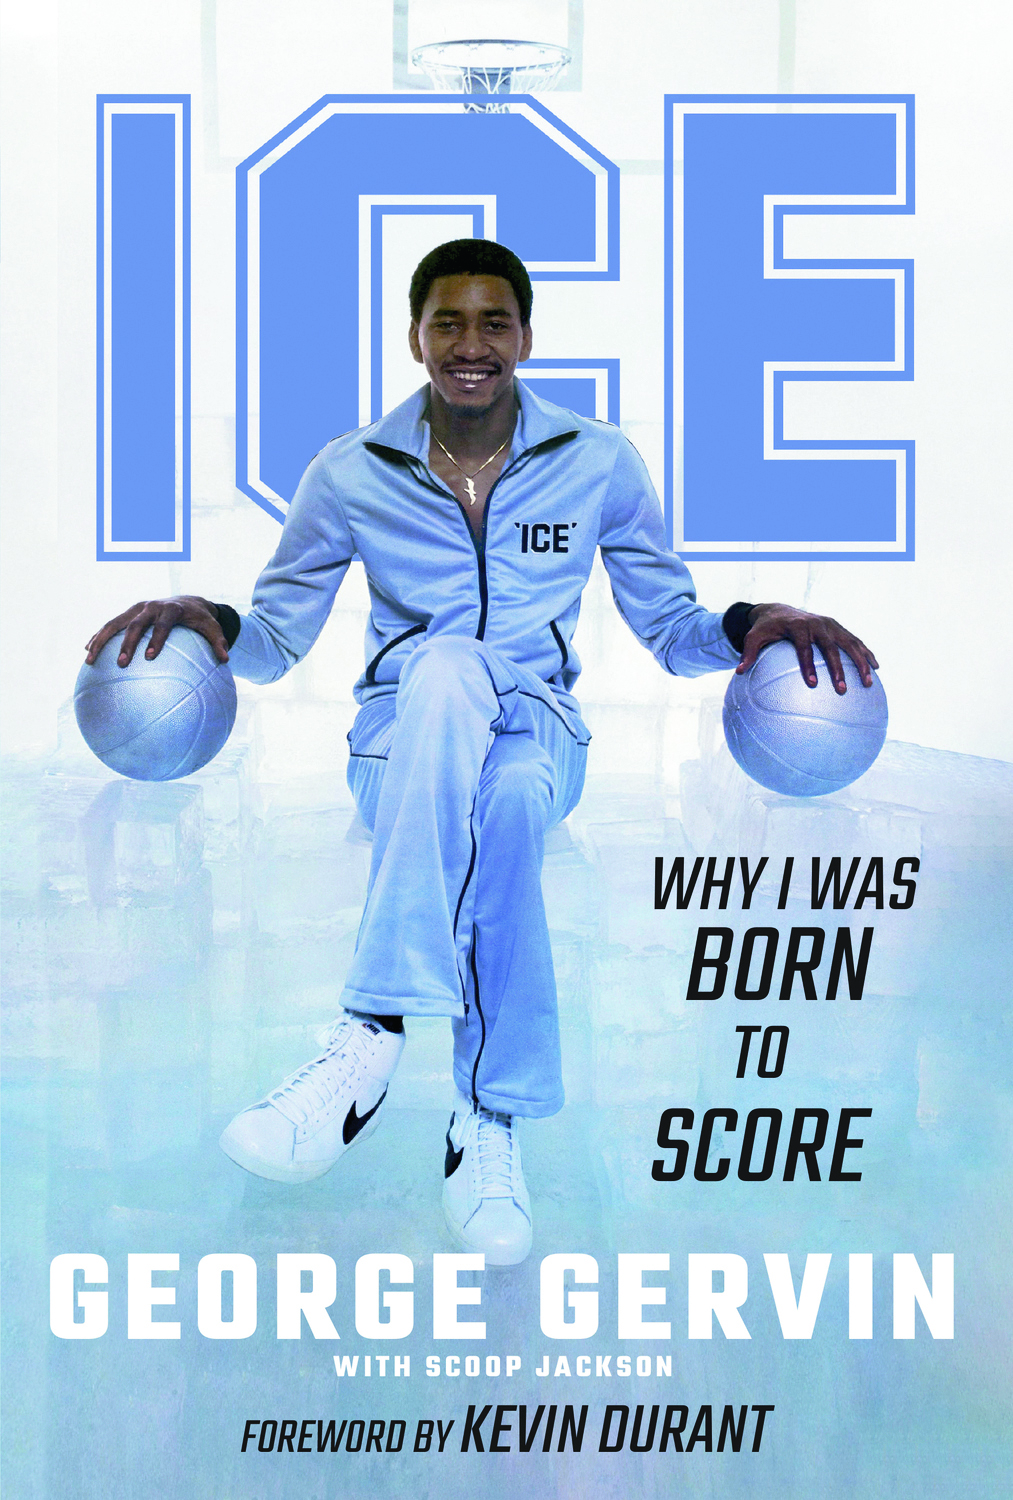 Hall of Famer George Gervin Opens Up About His Career, the Spurs and Life after Basketball in ‘Ice: Ice: Why I Was Born to Score’